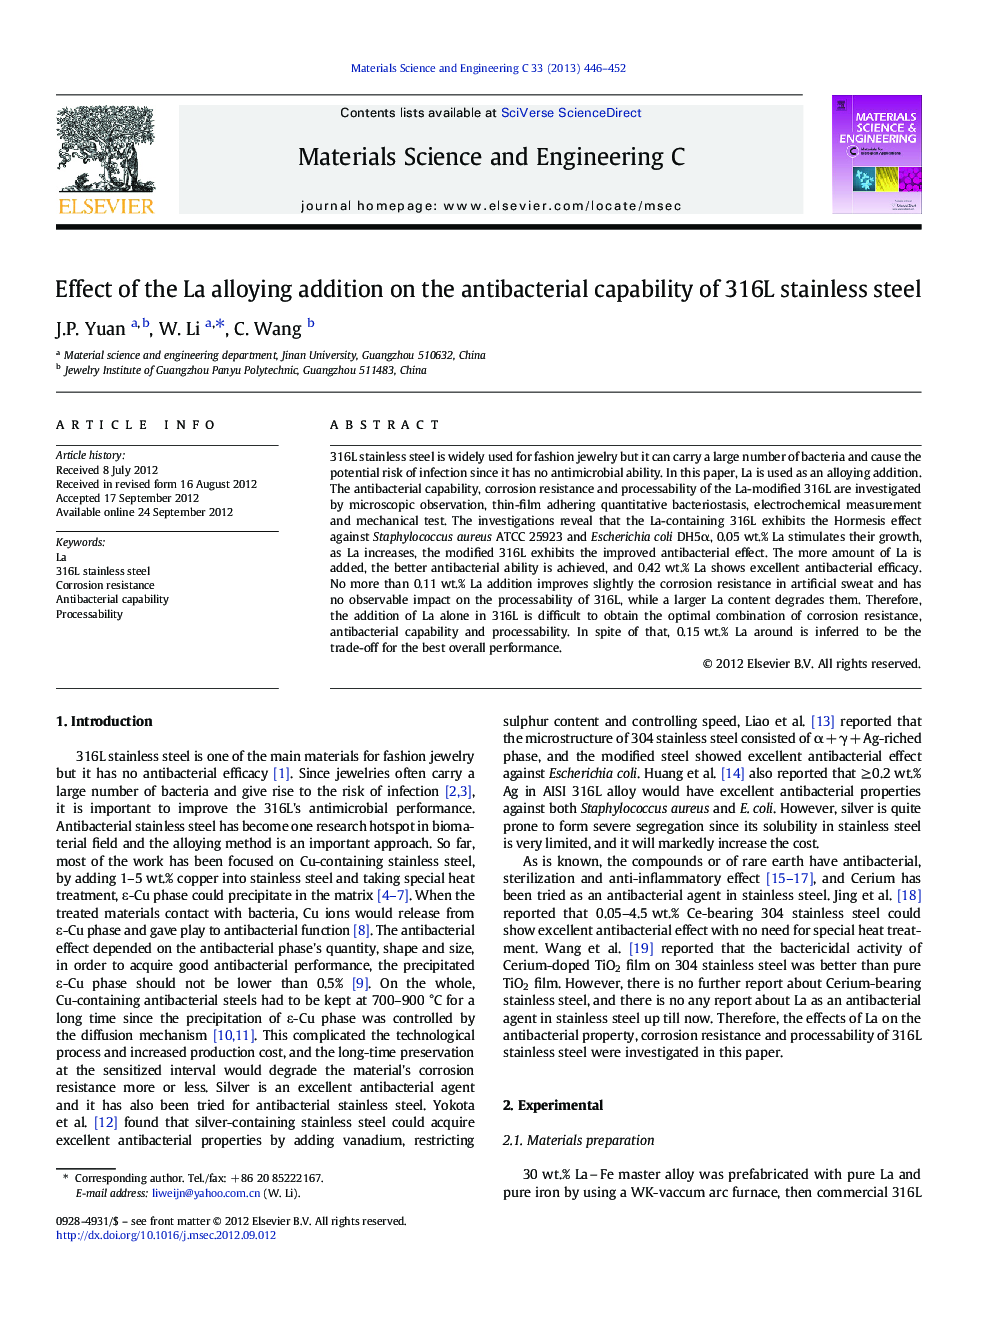 Effect of the La alloying addition on the antibacterial capability of 316L stainless steel